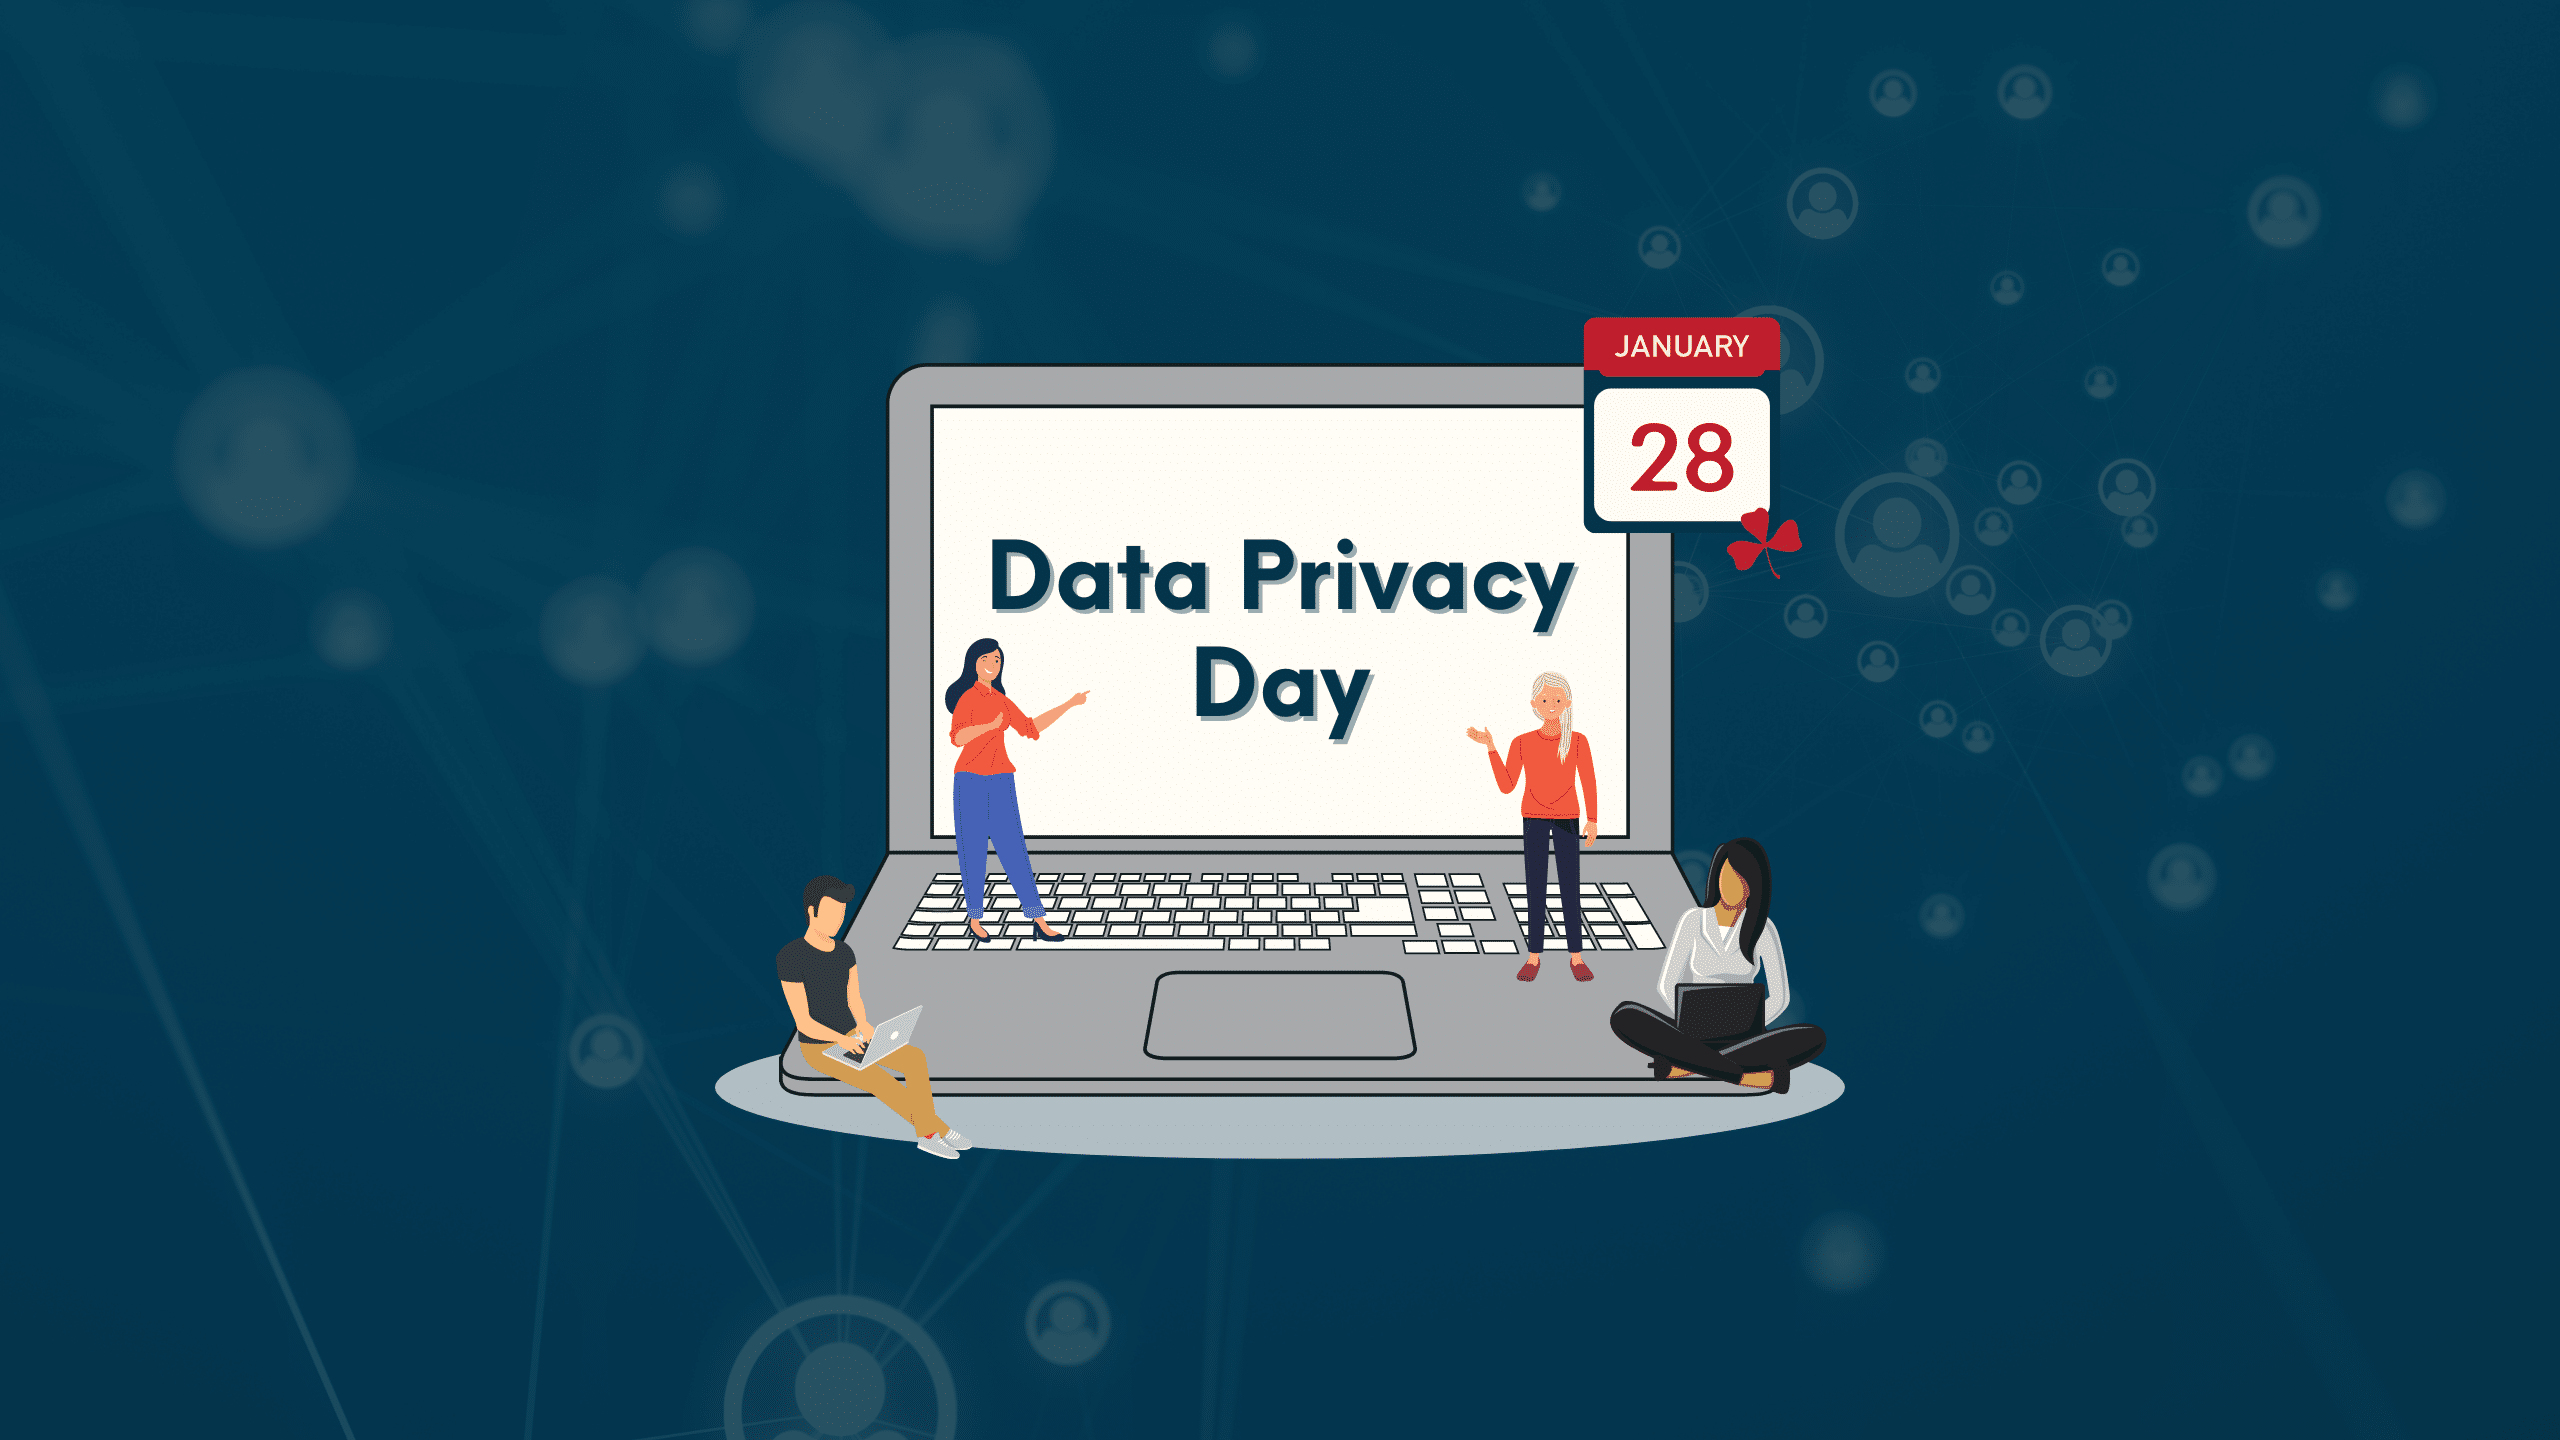 Nurture a Year-Long Privacy Culture Beyond Data Privacy Day